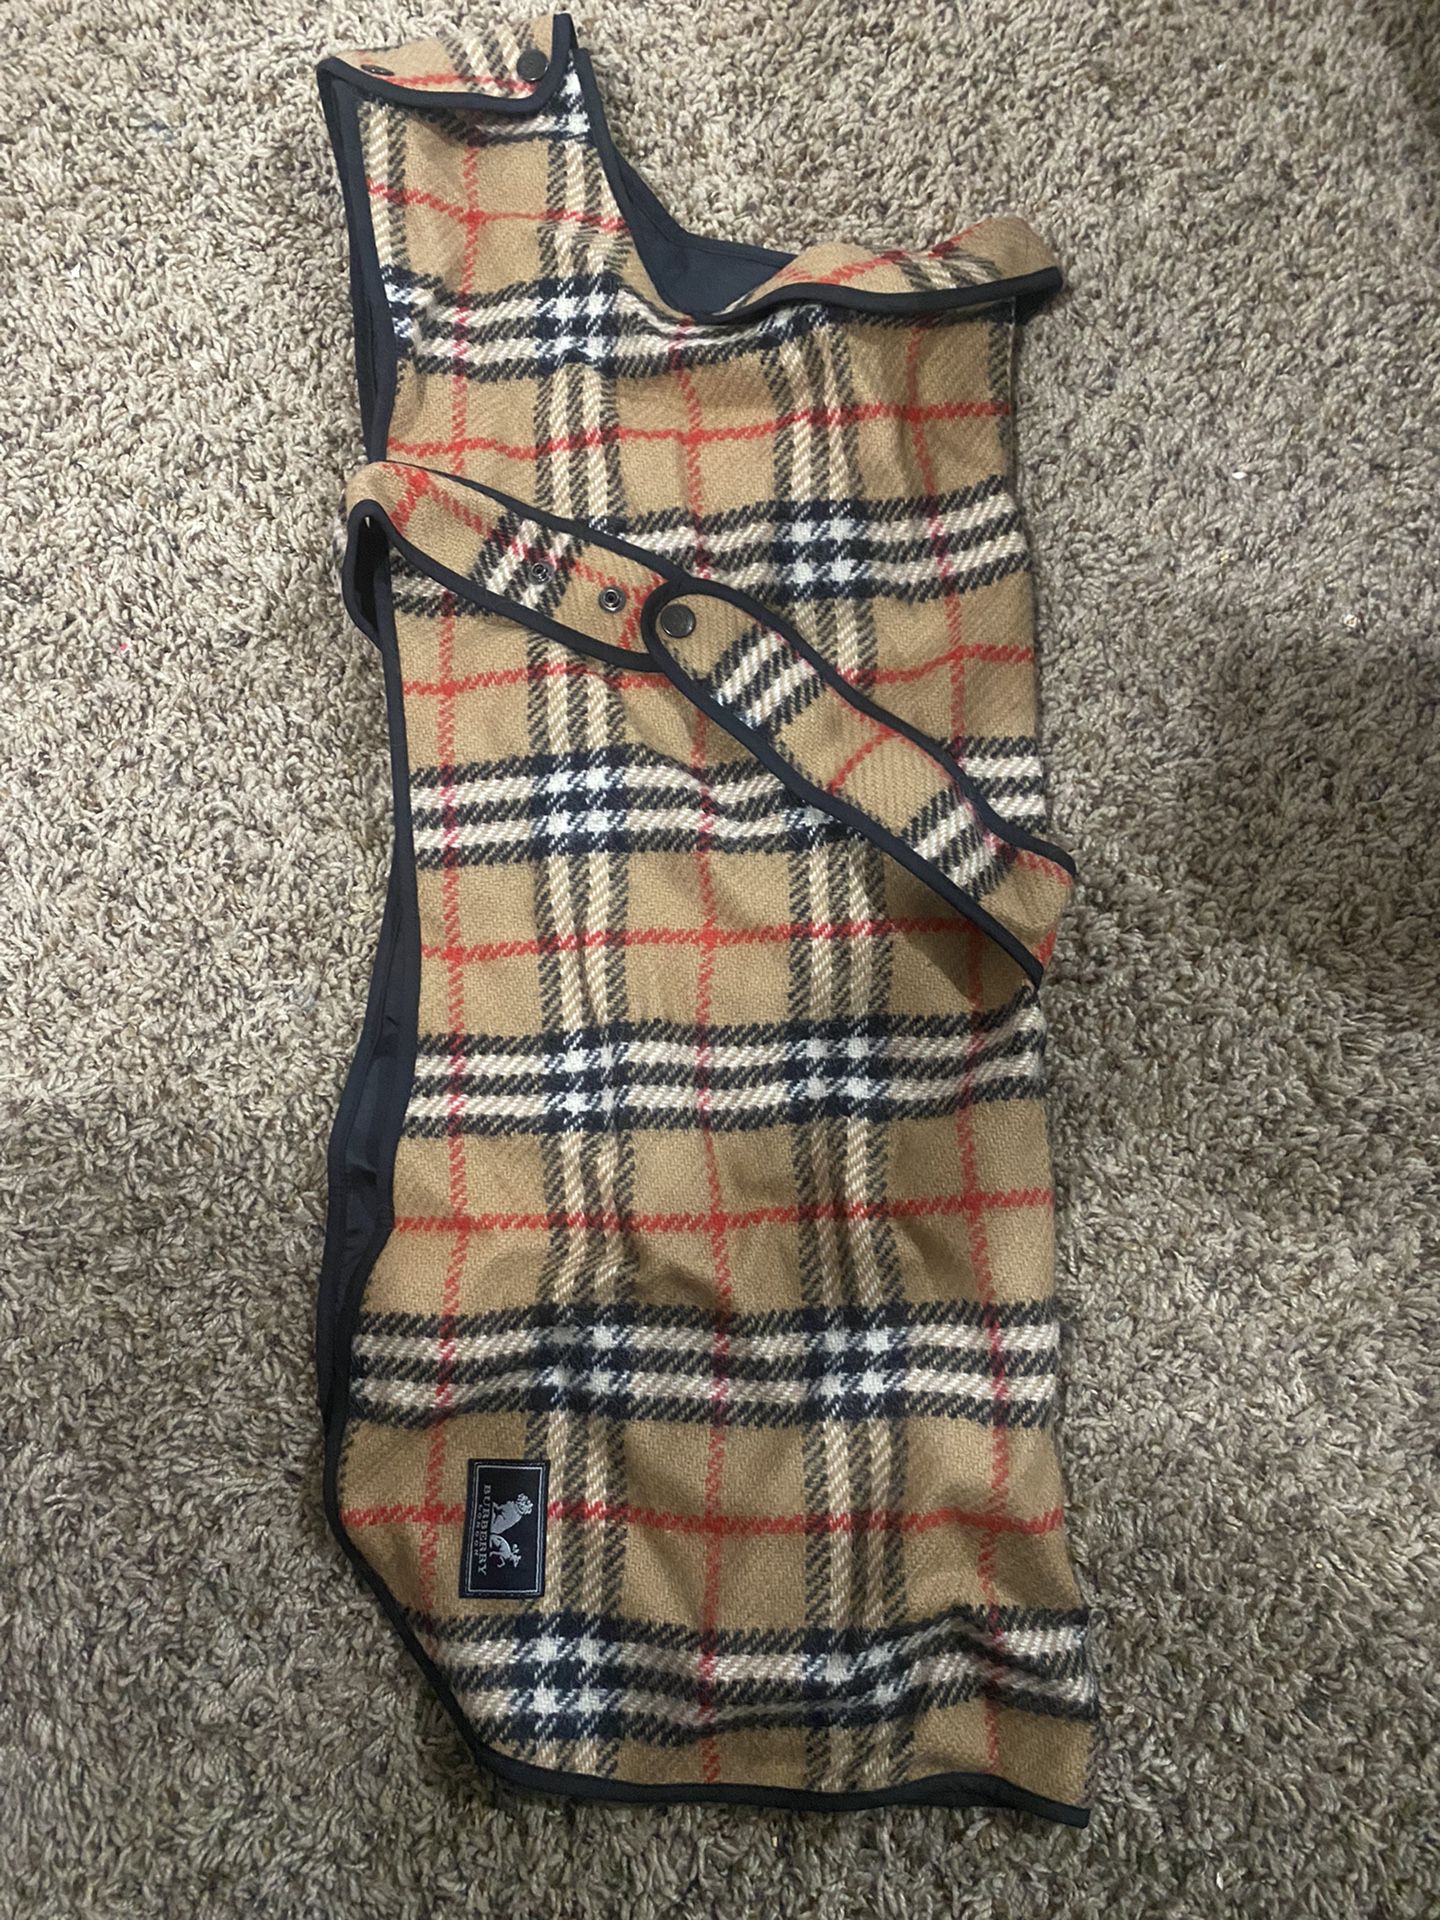 Official Burberry Dog Coat 